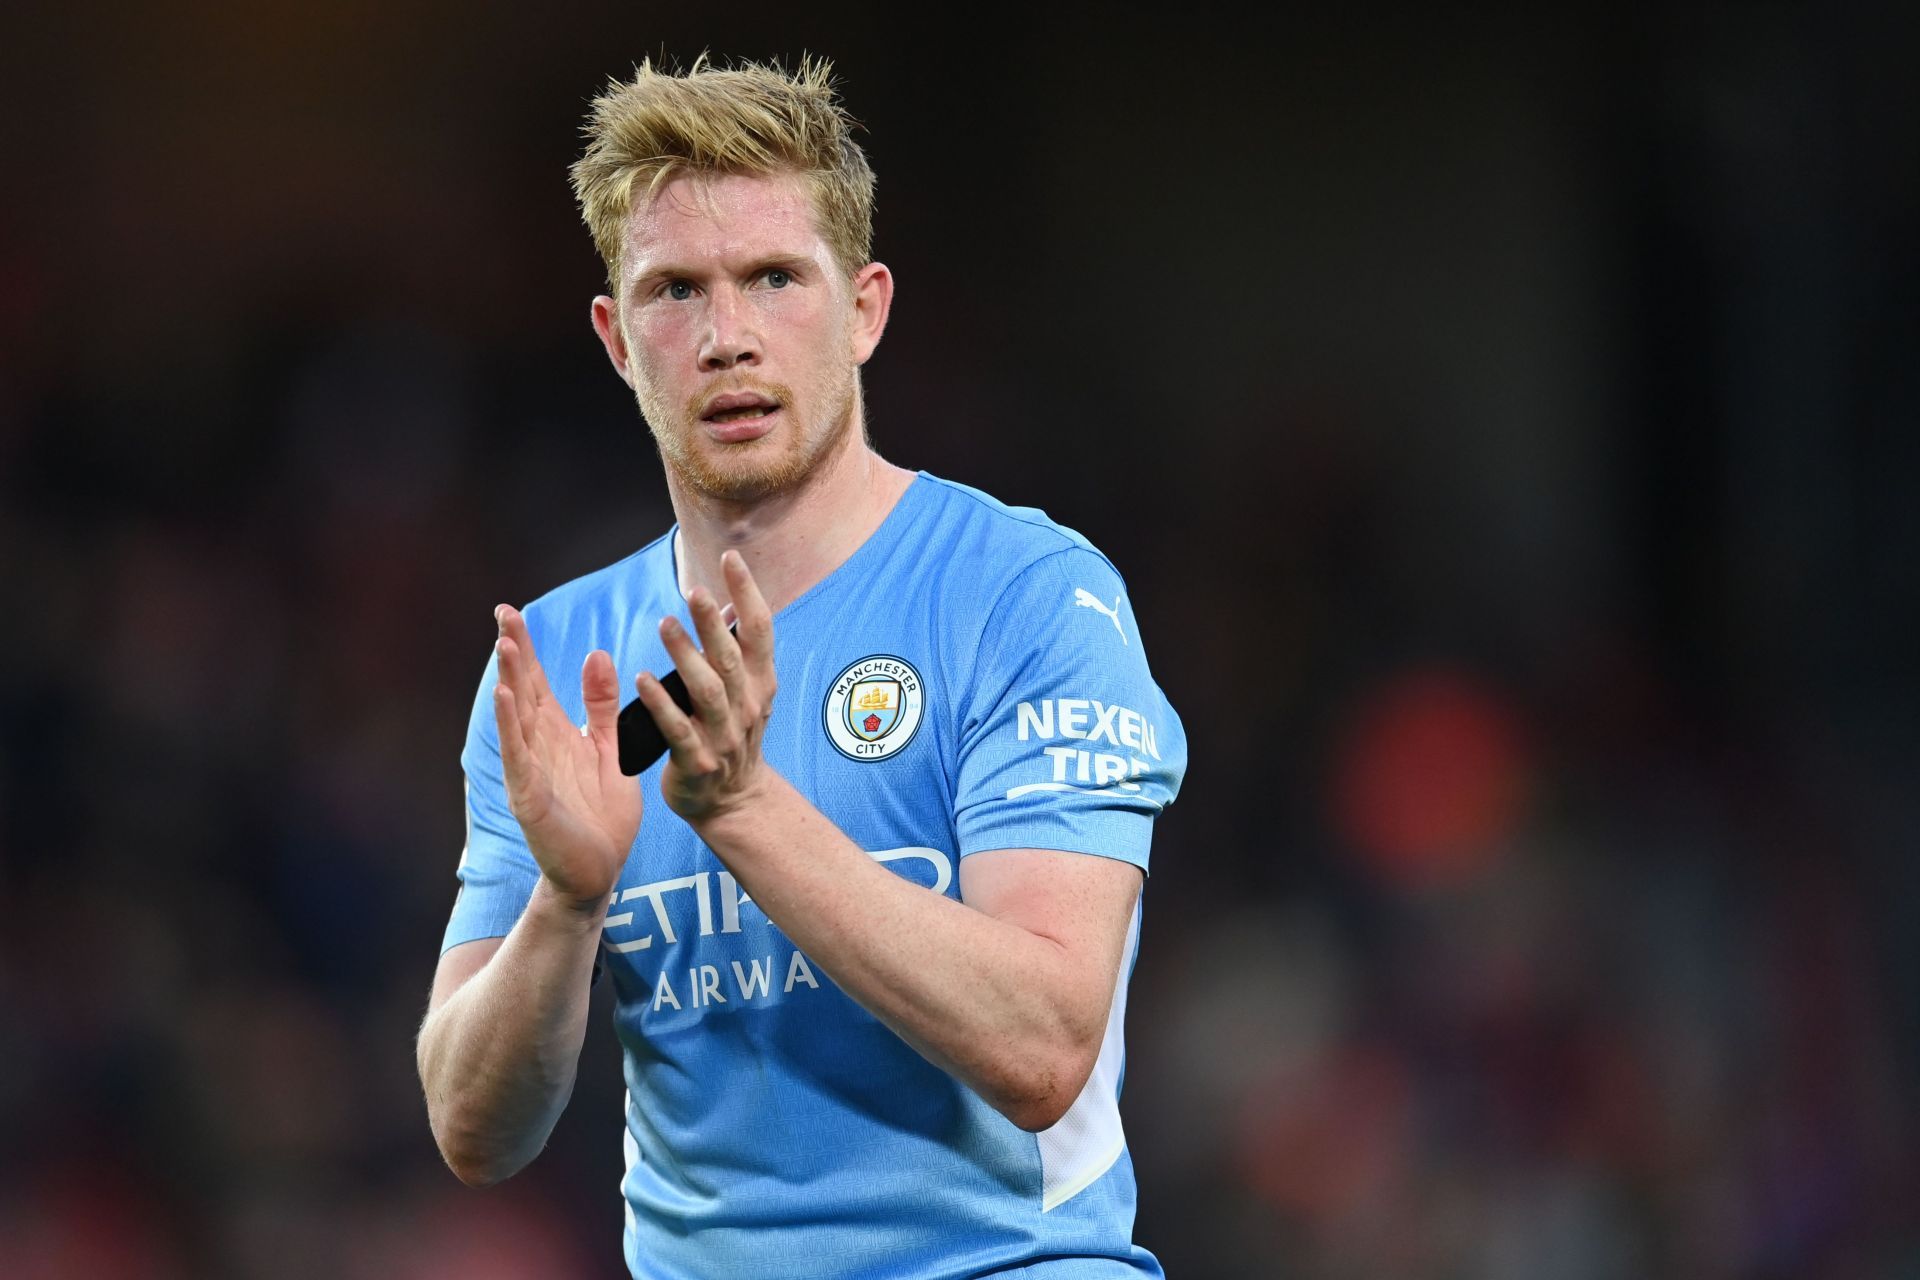 Kevin De Bruyne is a key player for Manchester City.